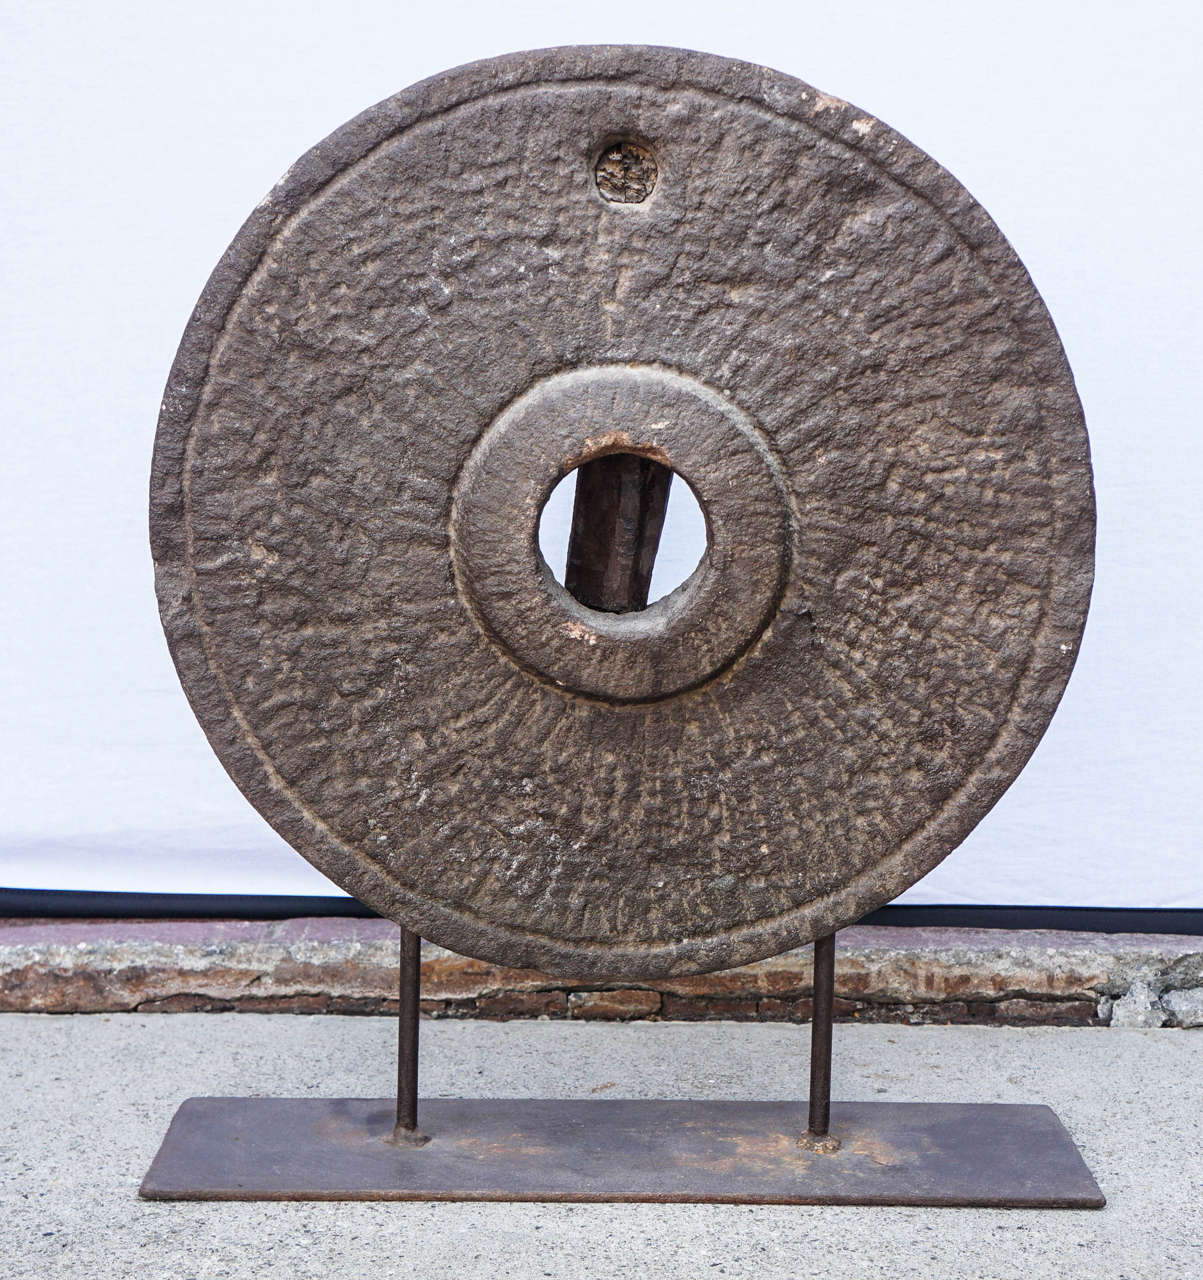 Archaic millstone, used to grind grains into a flour consistency.